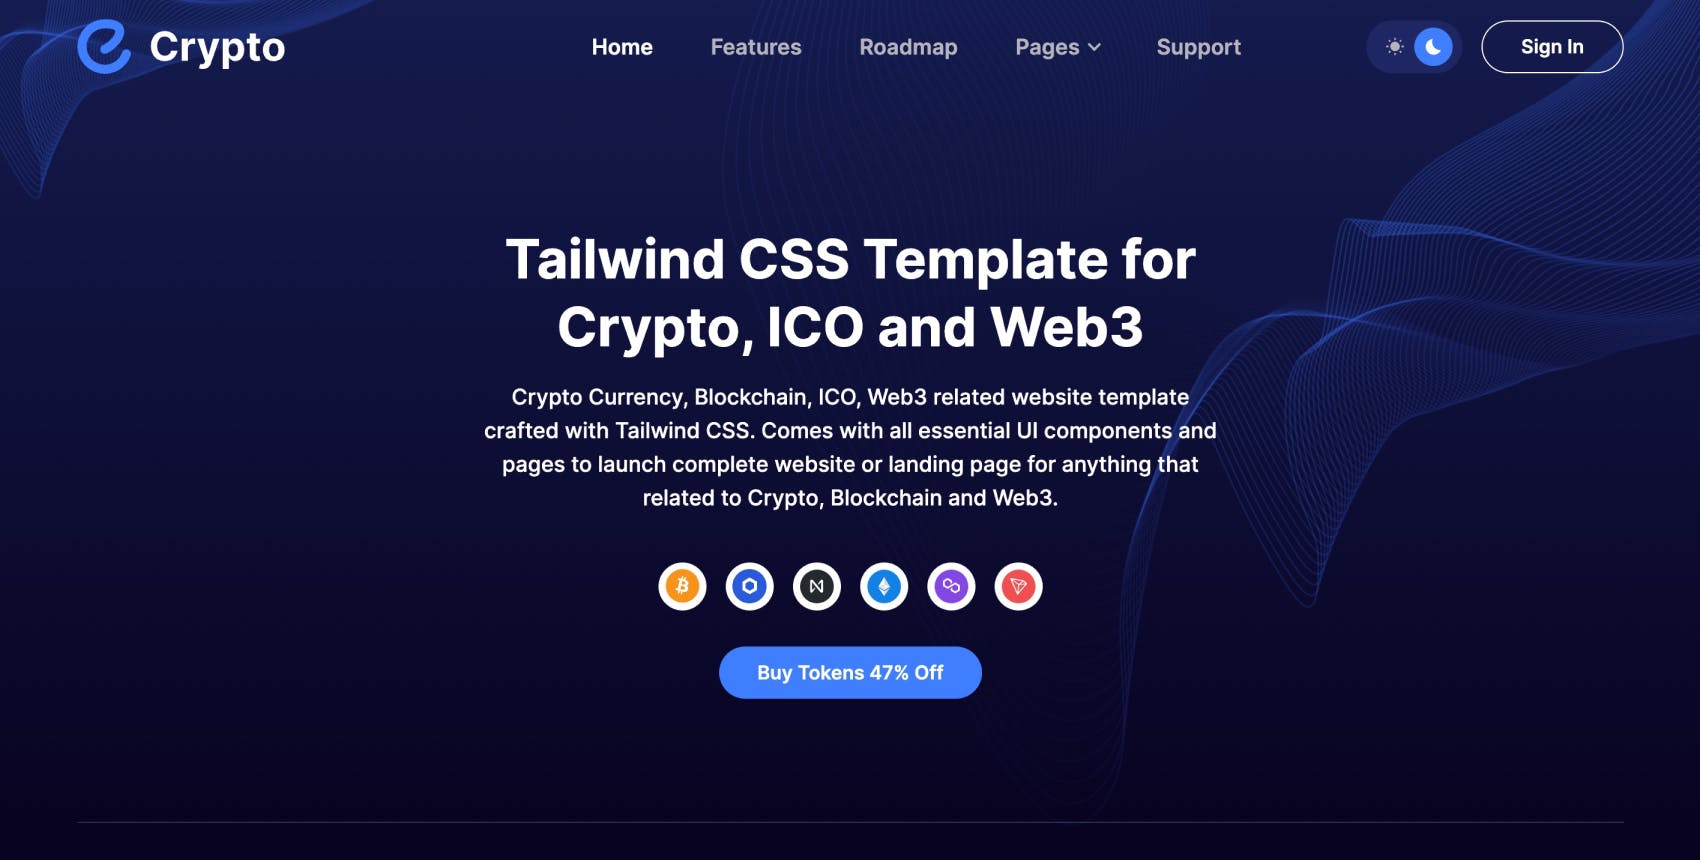 Crypto - Tailwind CSS Template for Crypto and Web3